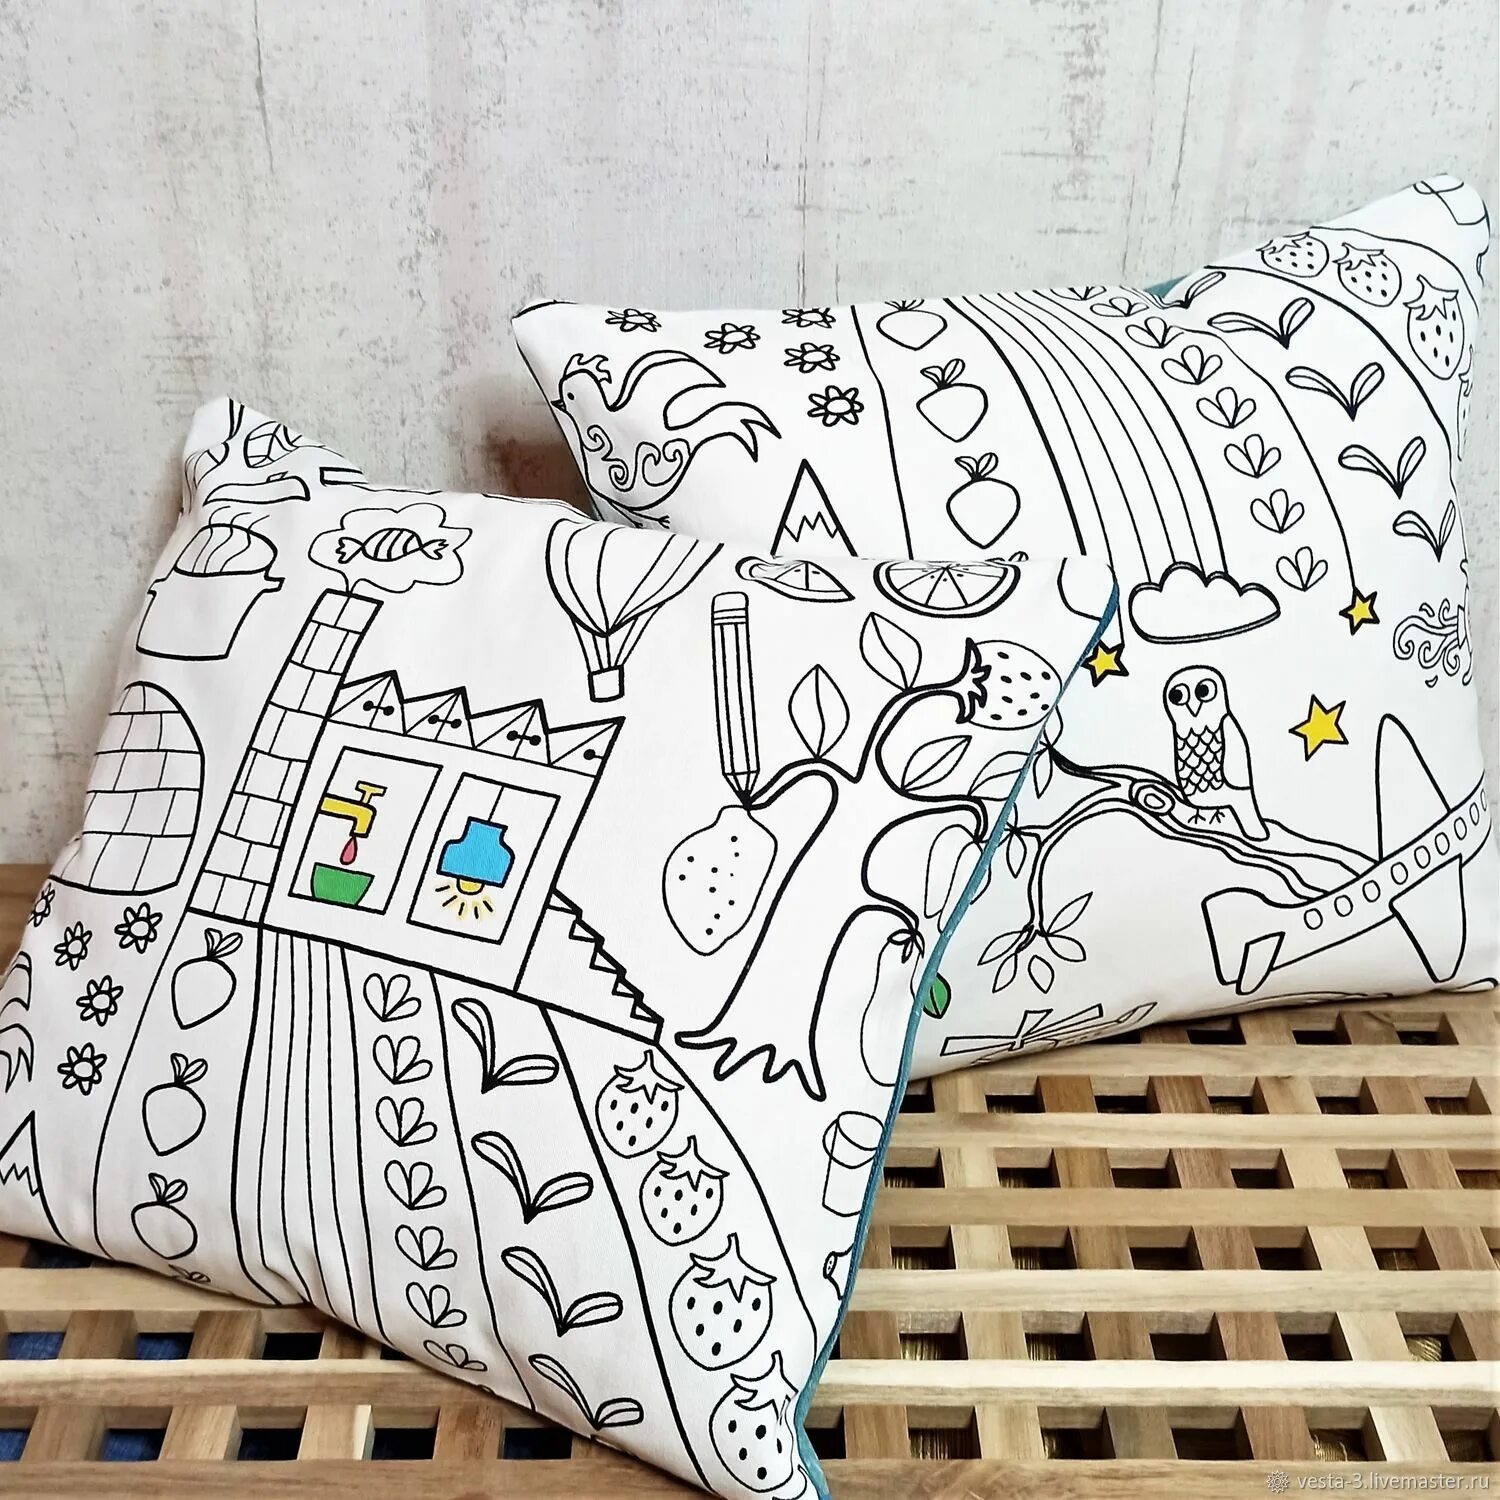 Fancy pillowcase coloring page